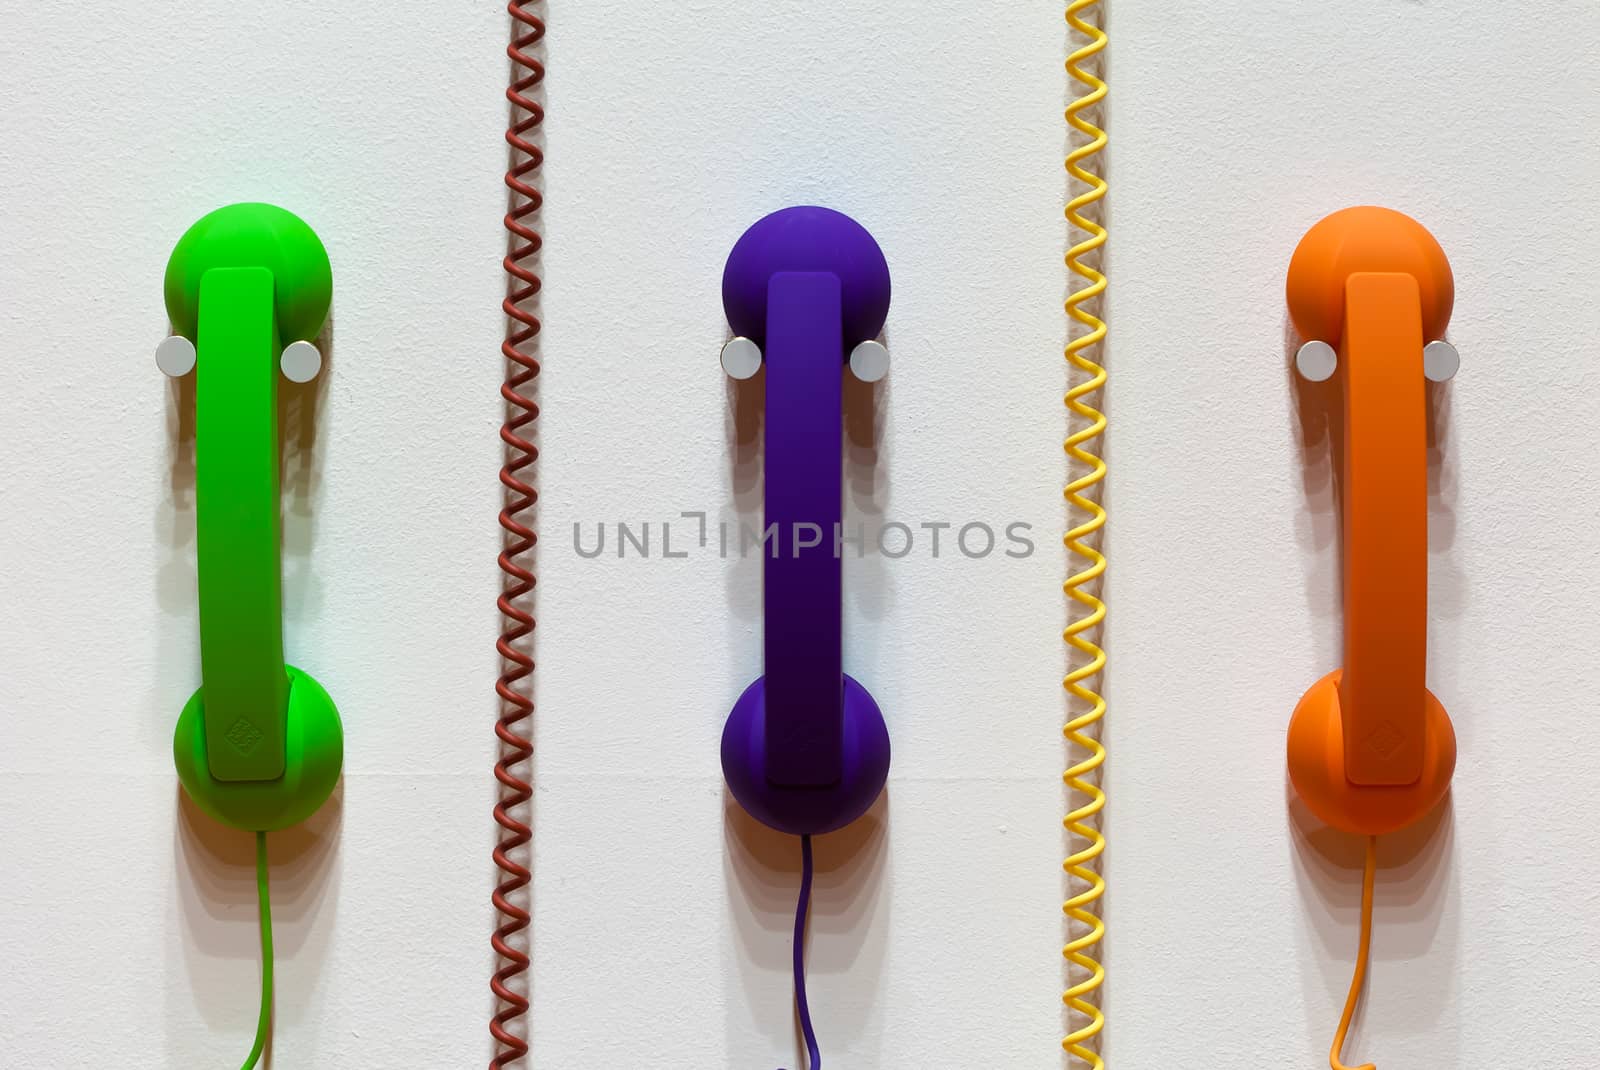 Color phones and phone cords by tdhster